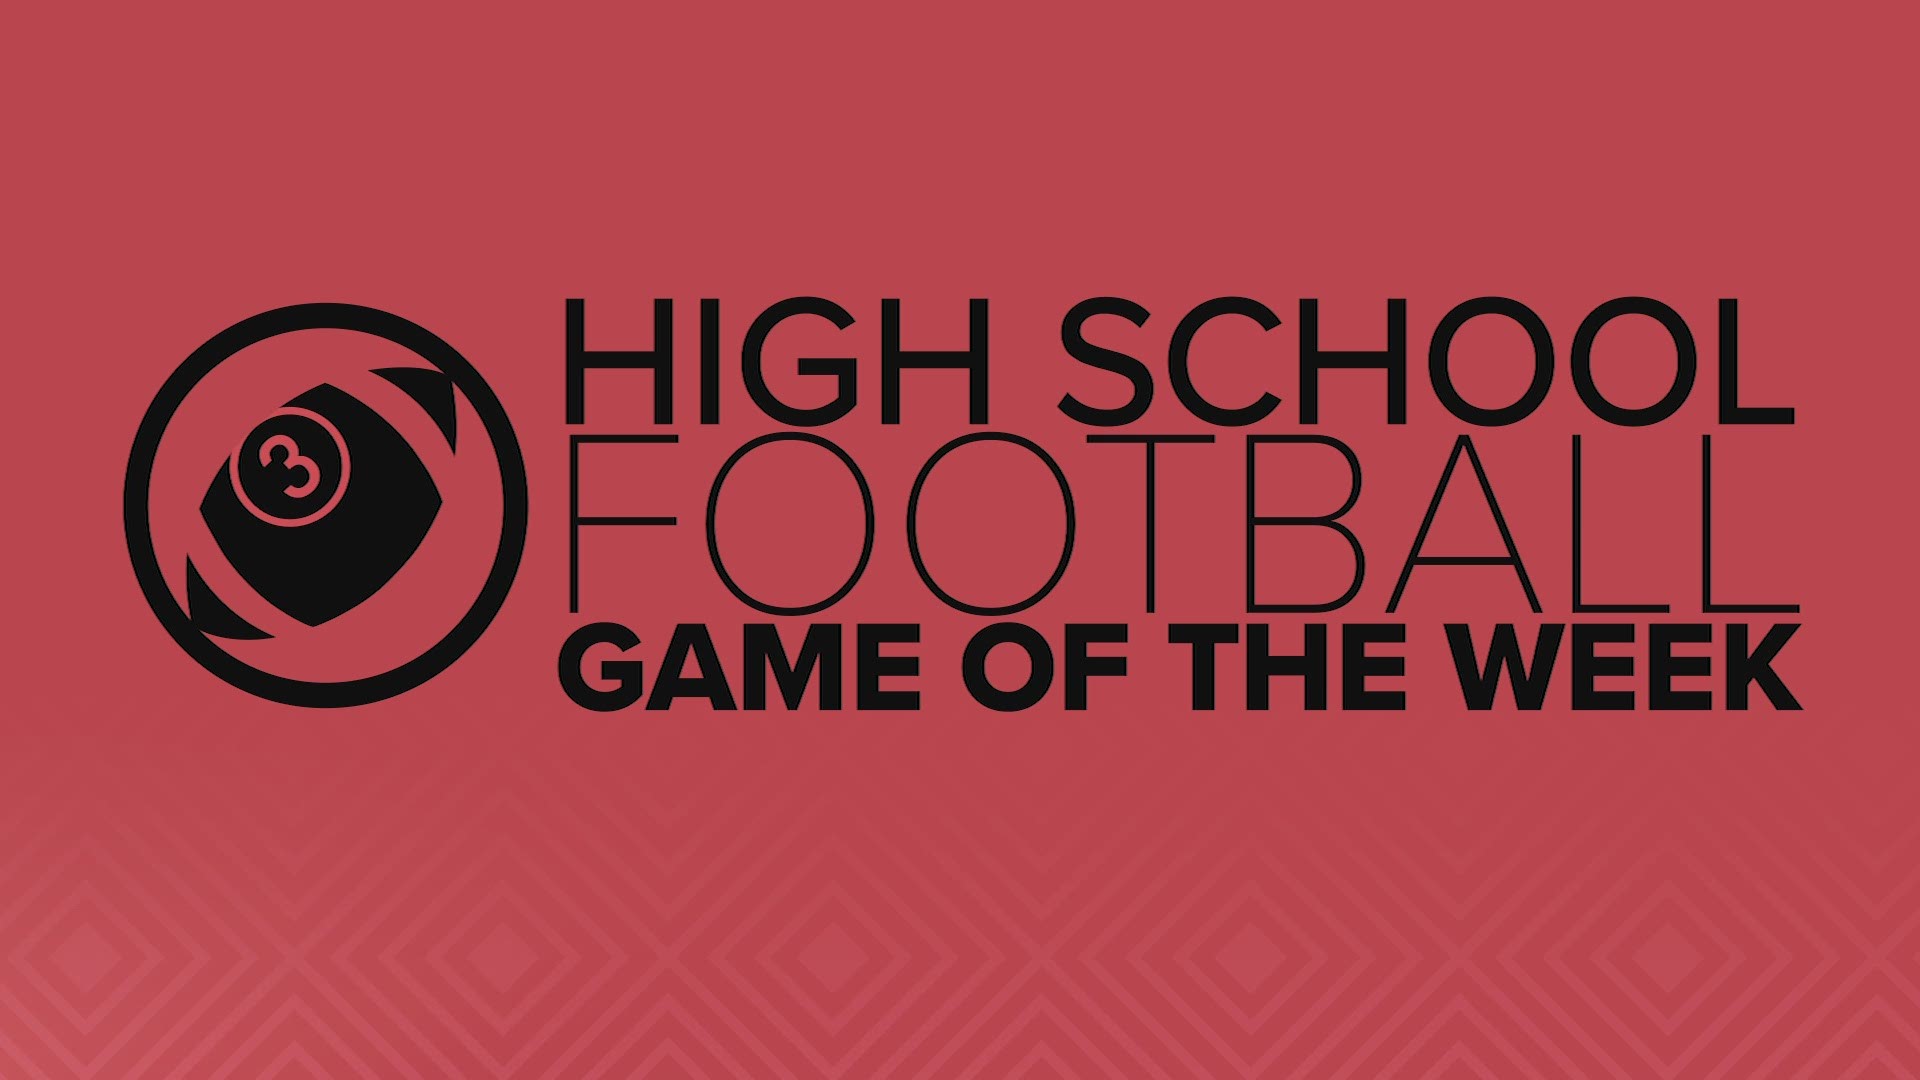 Game of the Week!  John Papesh caught three touchdowns as the Greenmen remained unbeaten.